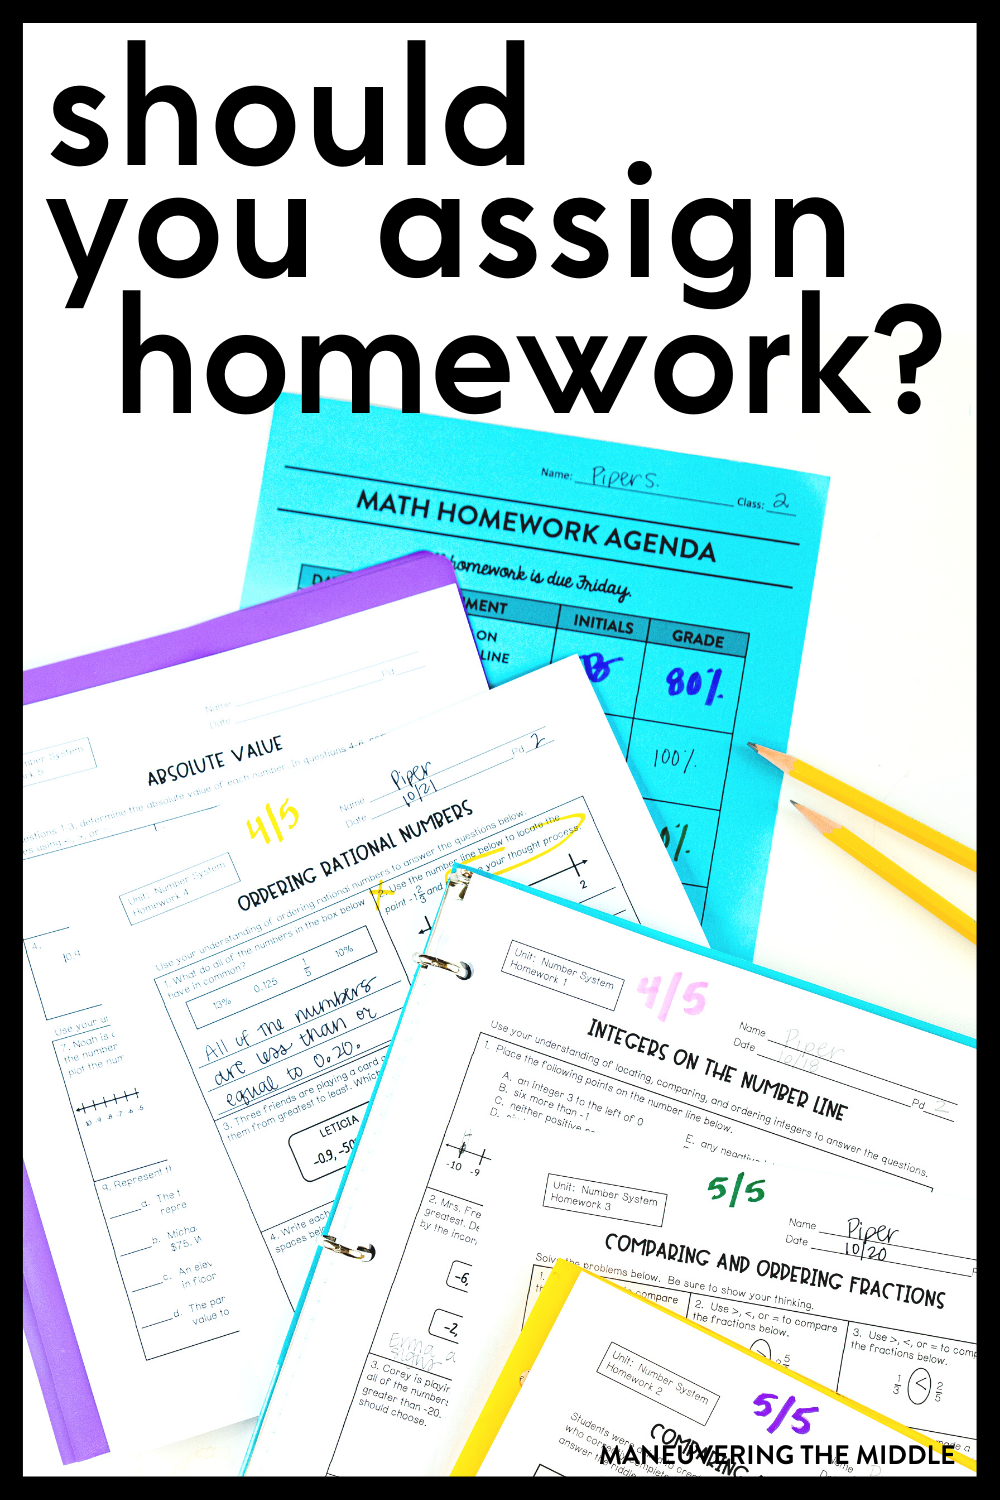 many teachers assign homework to students everyday essay